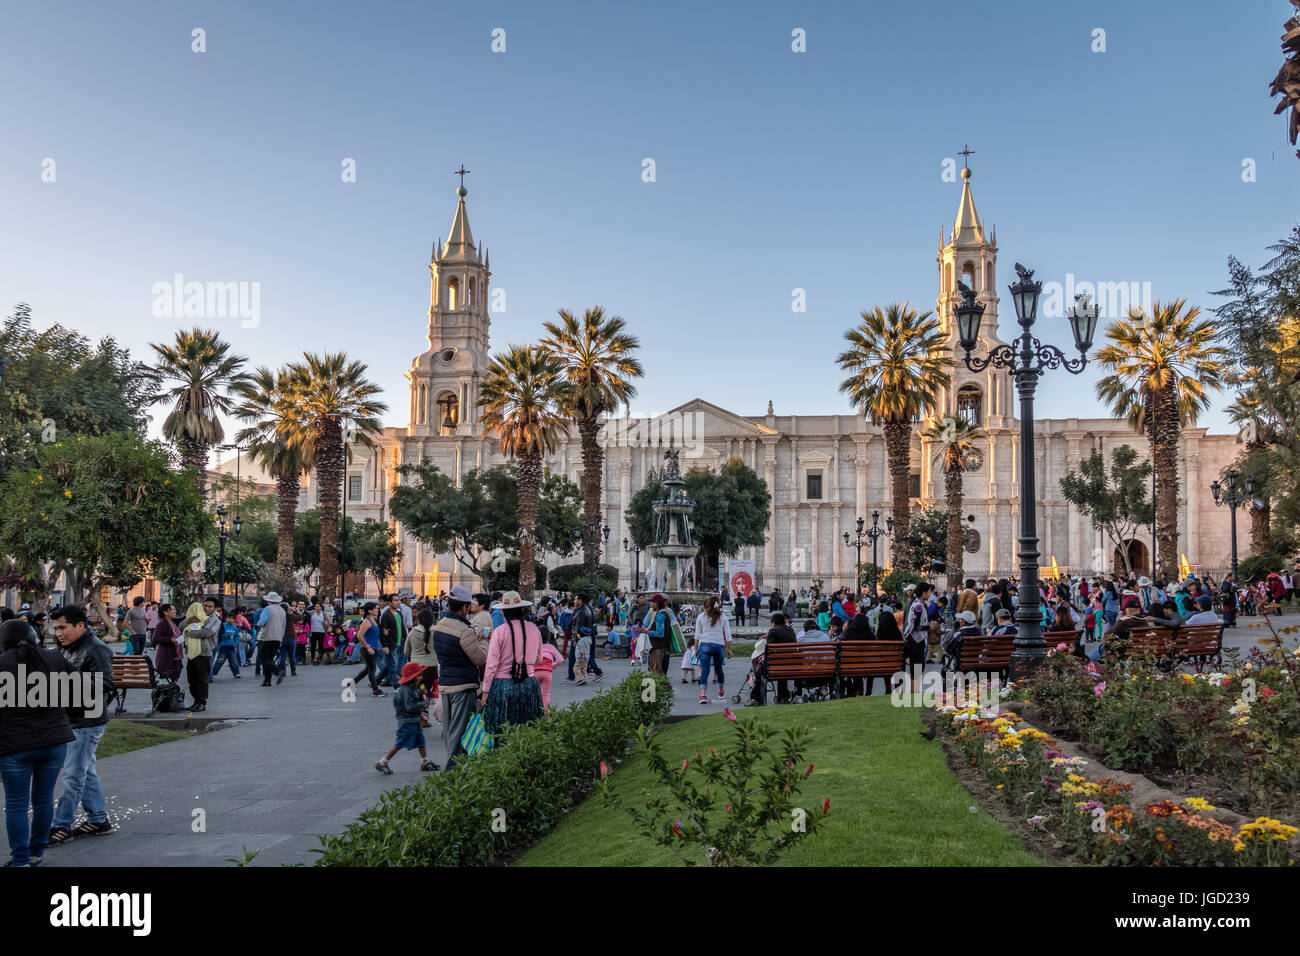 Plaza de Armas and Cathedral - Arequipa, Peru Stock Photo